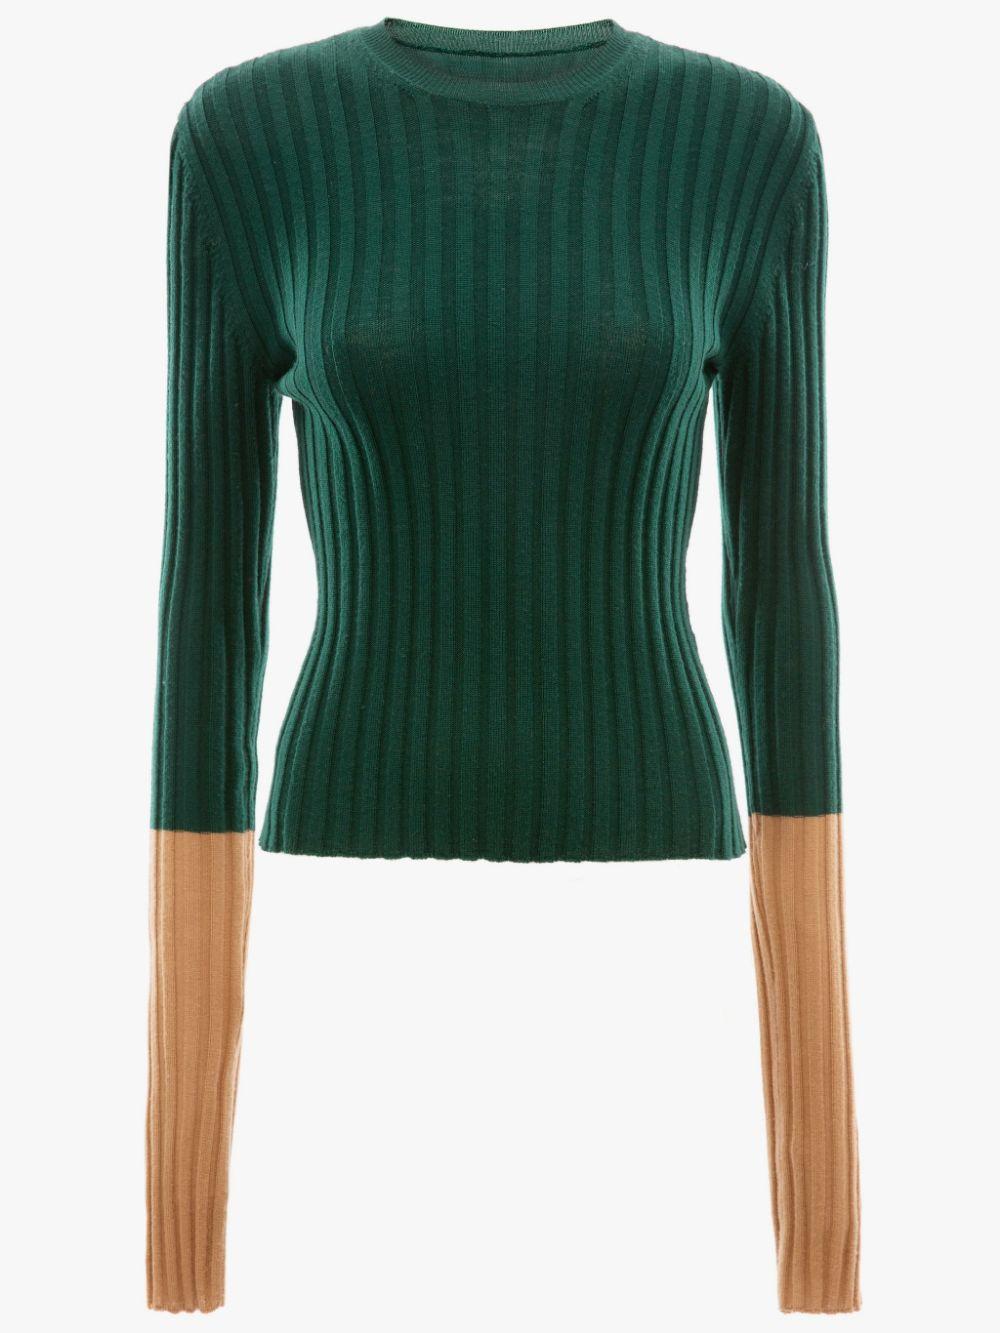 JW Anderson Wool Long Sleeve Ribbed Top in Green - Lyst